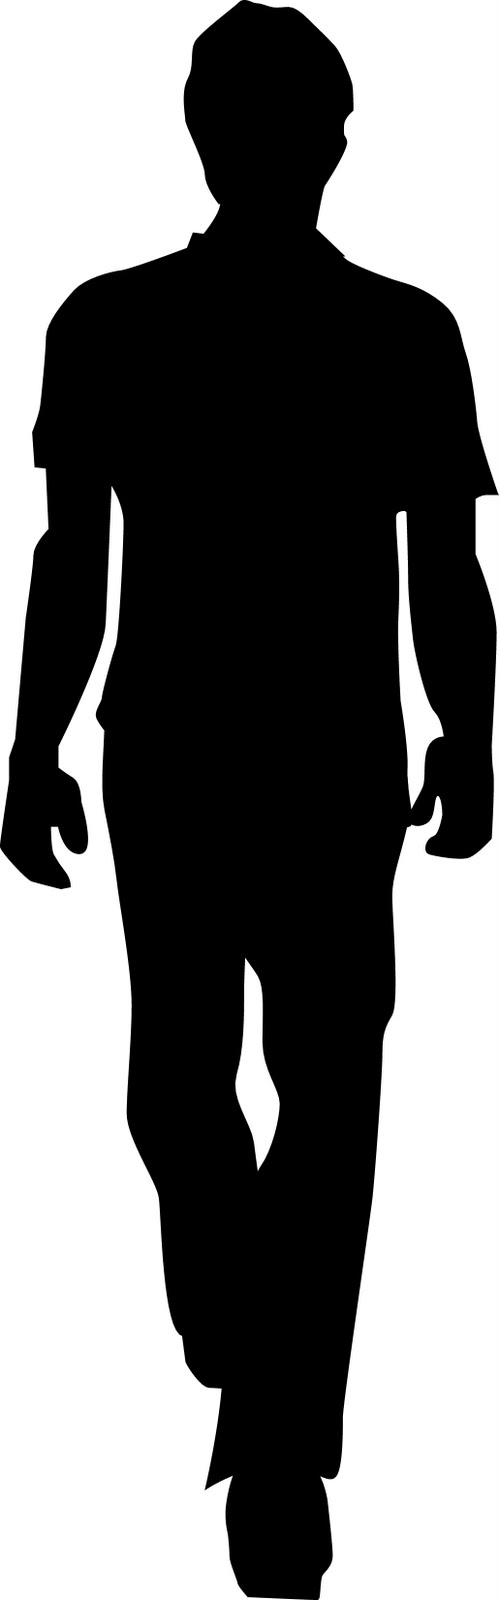 Man Standing Silhouette - Cliparts.co